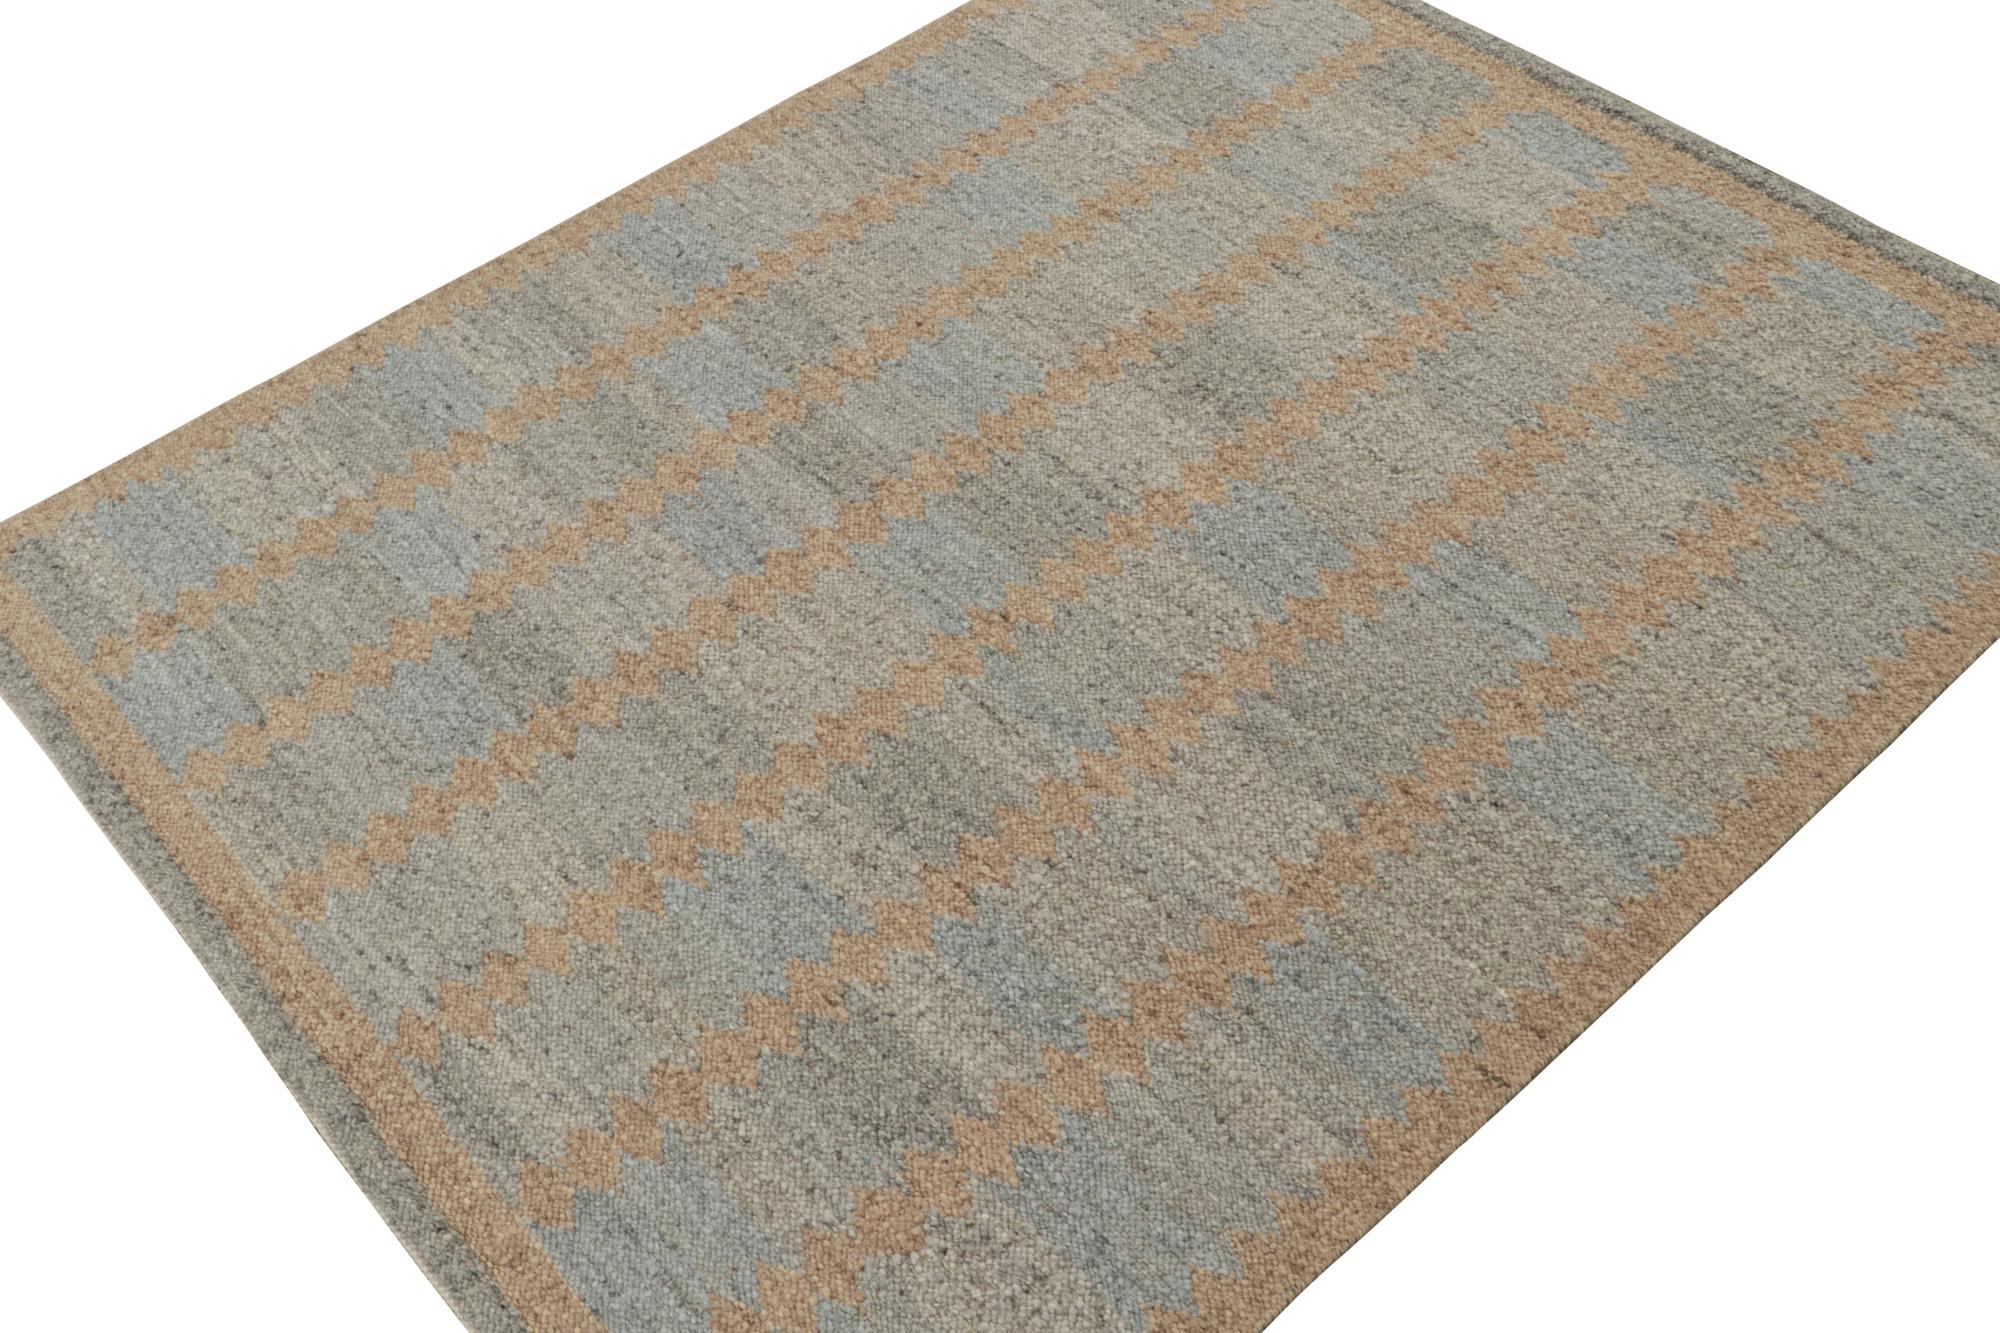 Indian Rug & Kilim’s Scandinavian Style Kilim in Blue, Gray & Brown Geometric Patterns For Sale